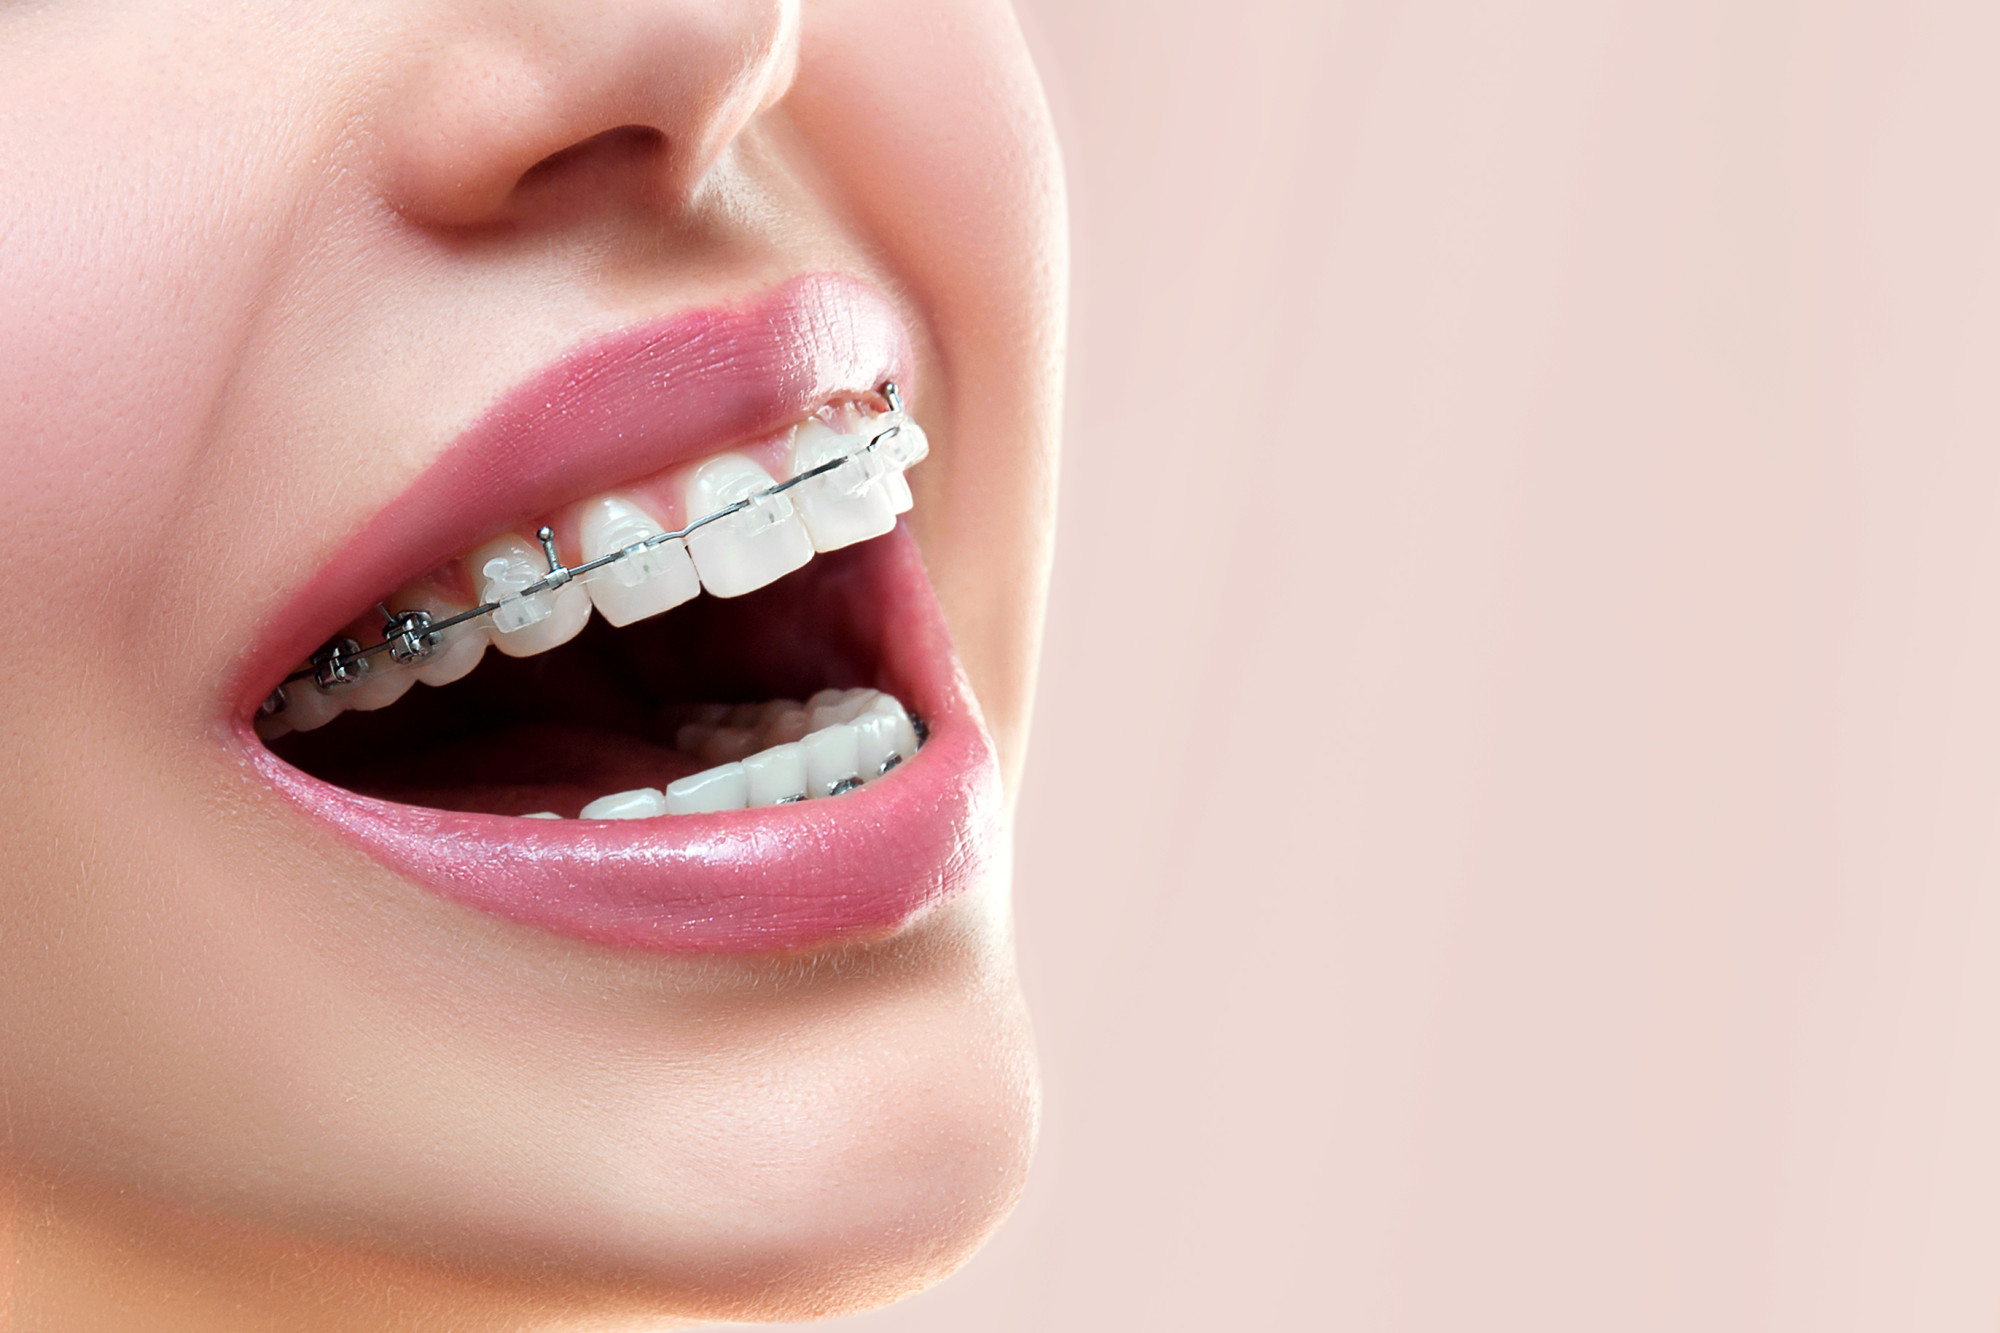 Ceramic braces, also known as clear braces, are an alternative teeth straightening option to metal braces. Learn the pros and cons of ceramic braces here.